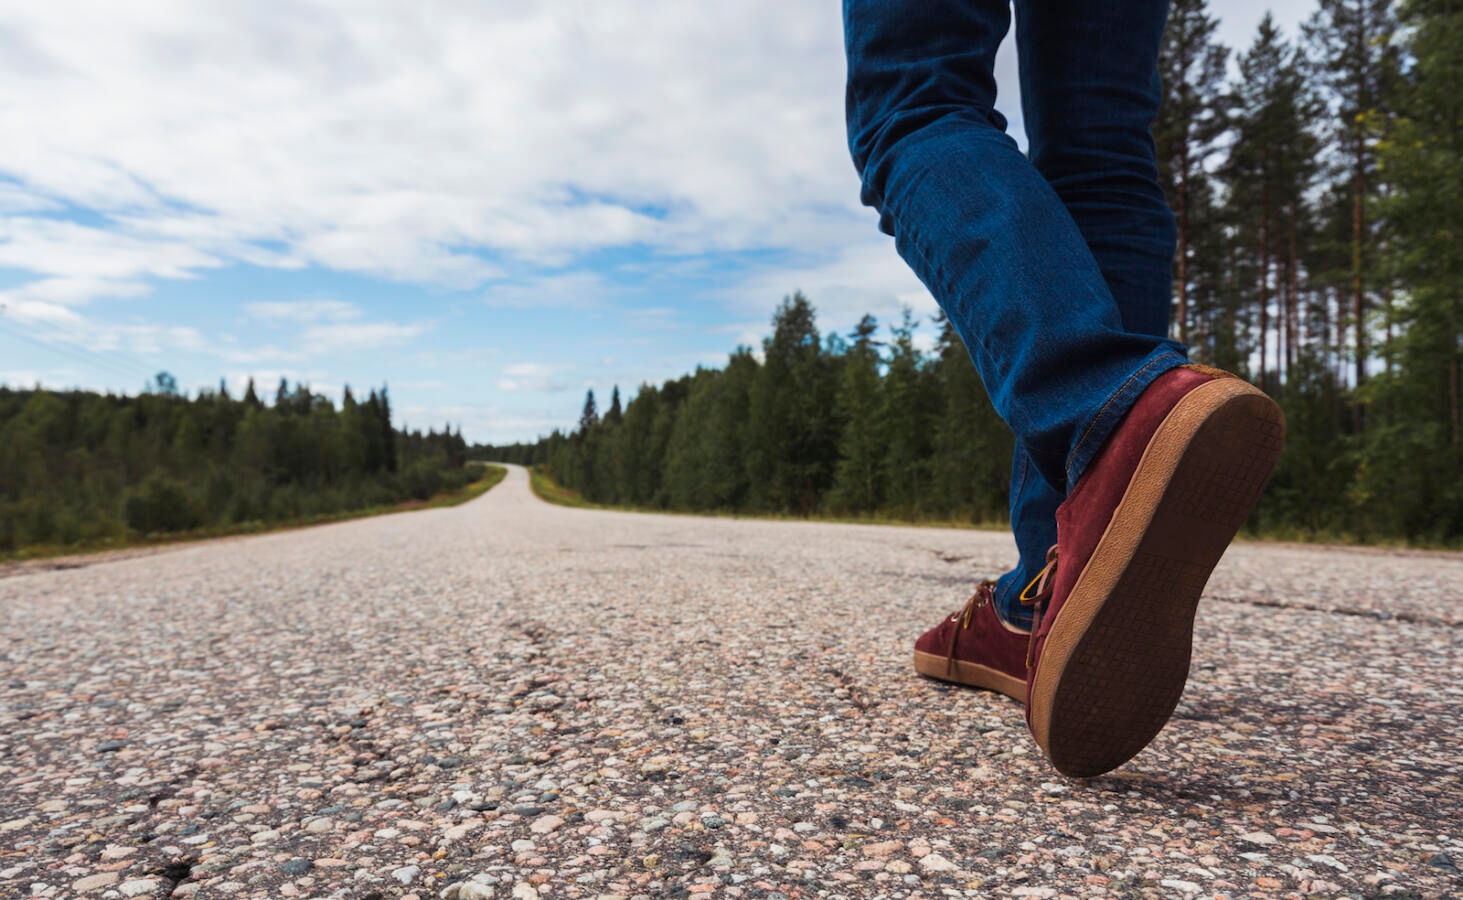 Finland, Lapland, feet of man walking on empty country road